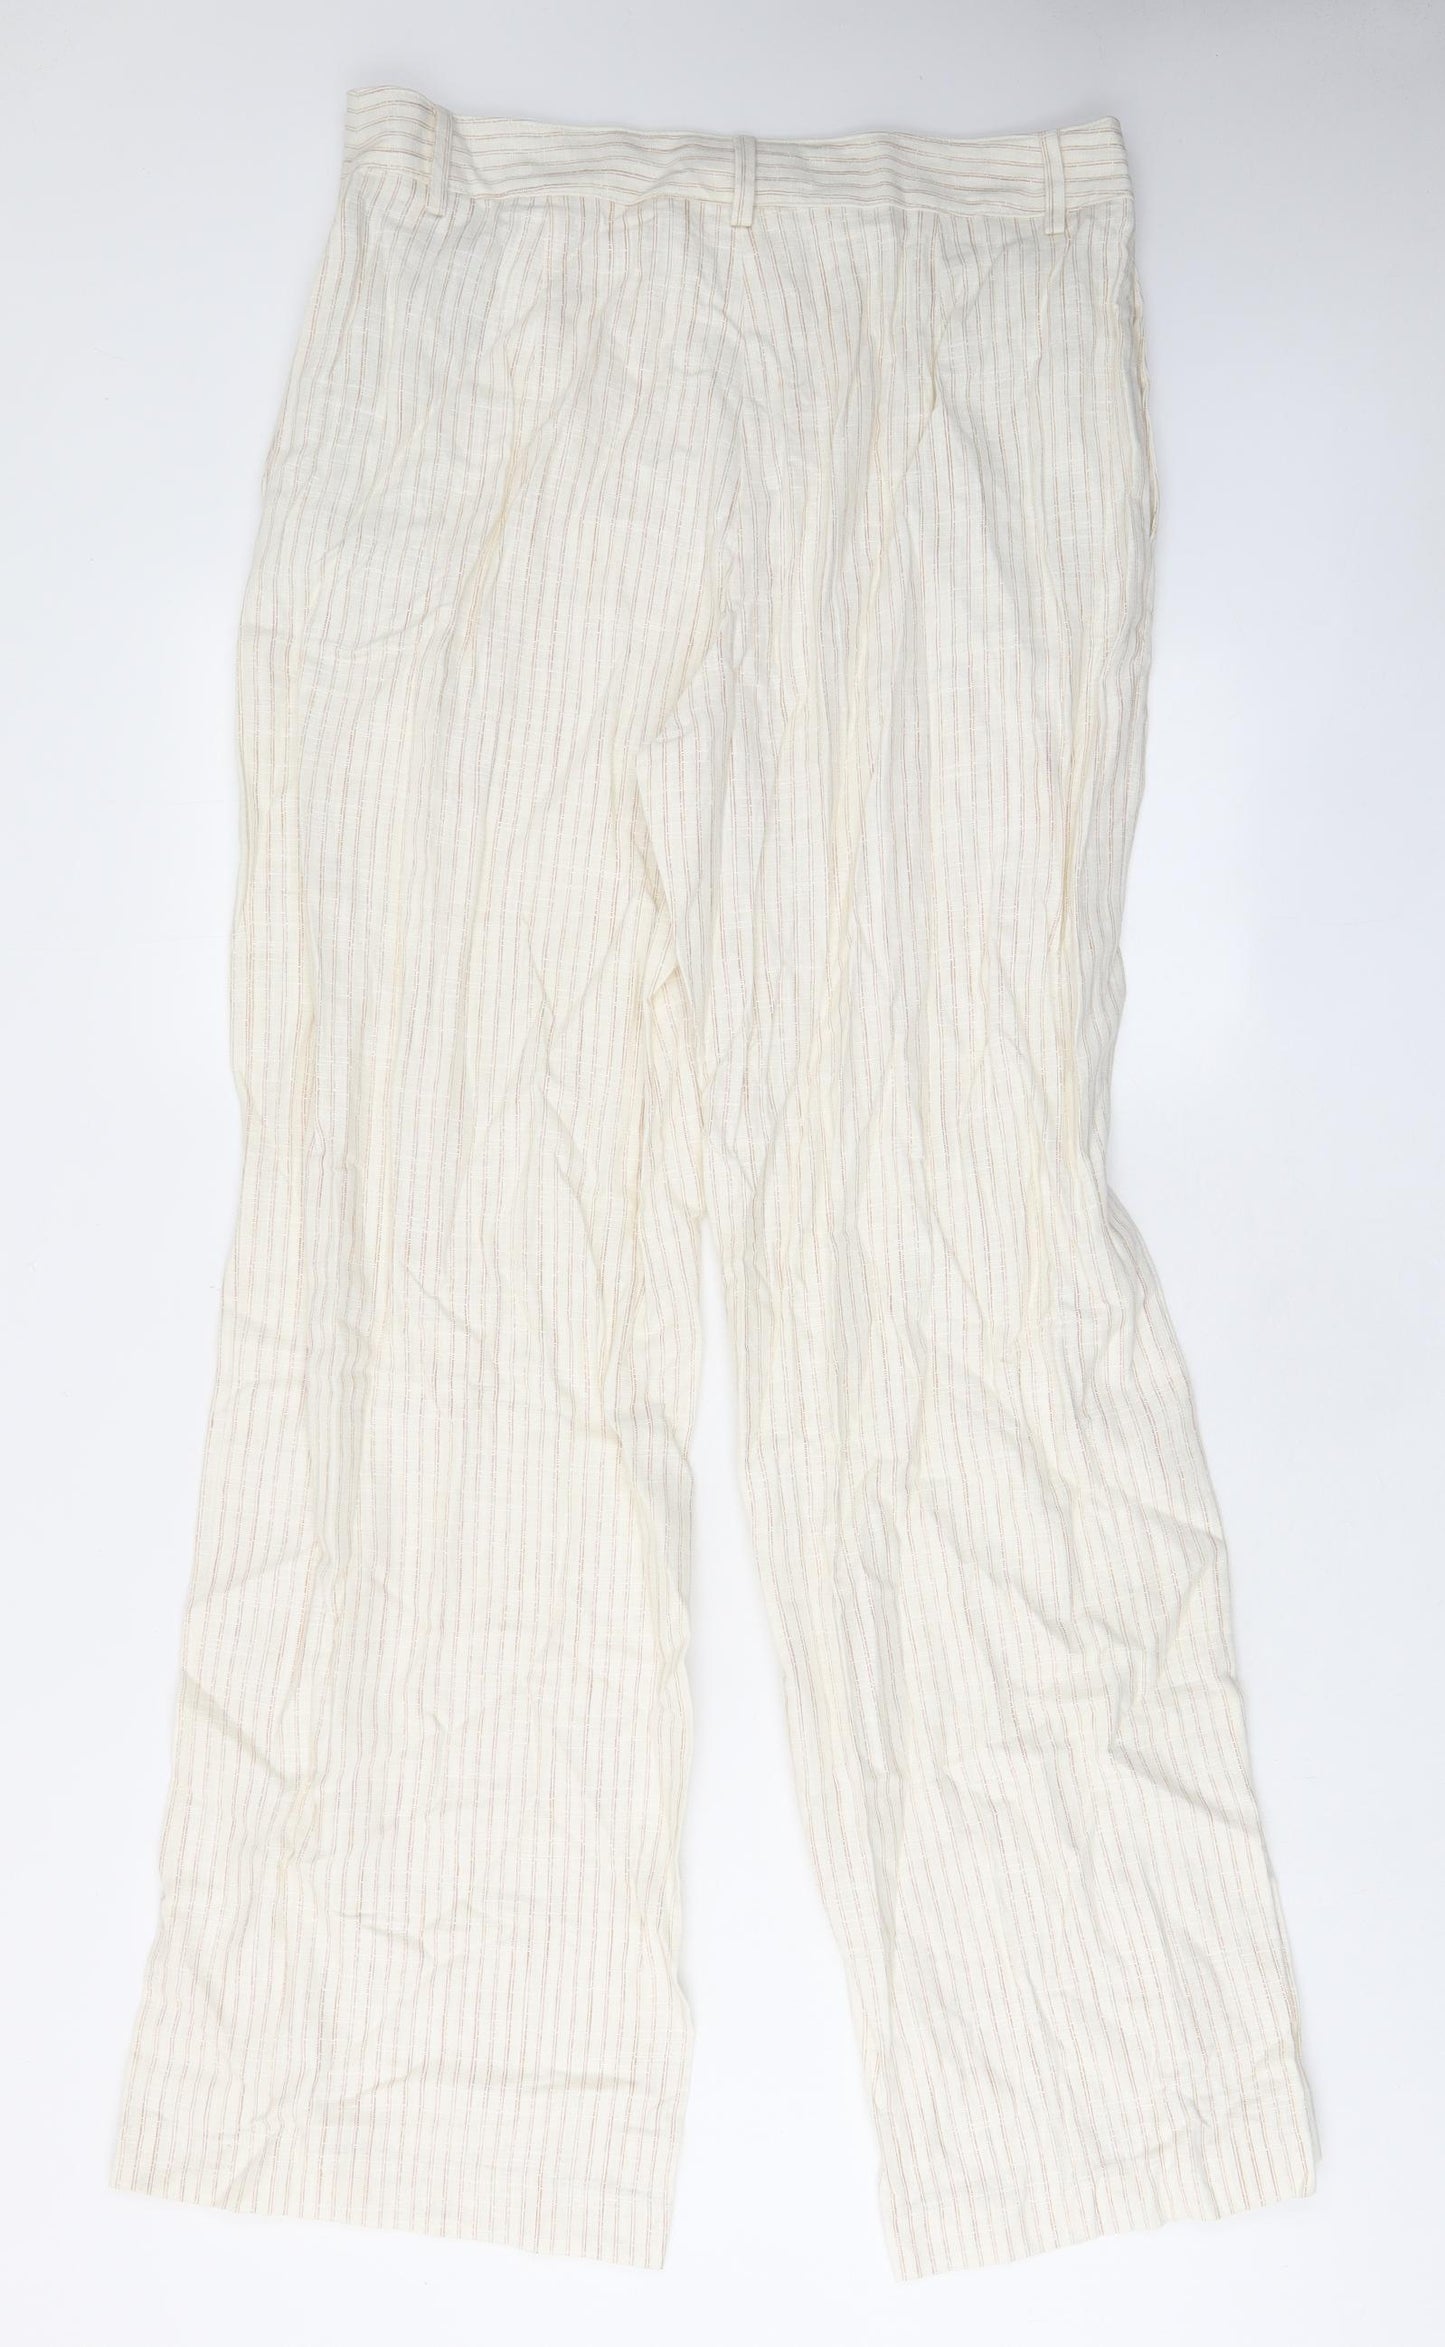 Marks and Spencer Womens Beige Striped Linen Trousers Size 14 L33 in Regular Zip - Pockets, Belt Loops